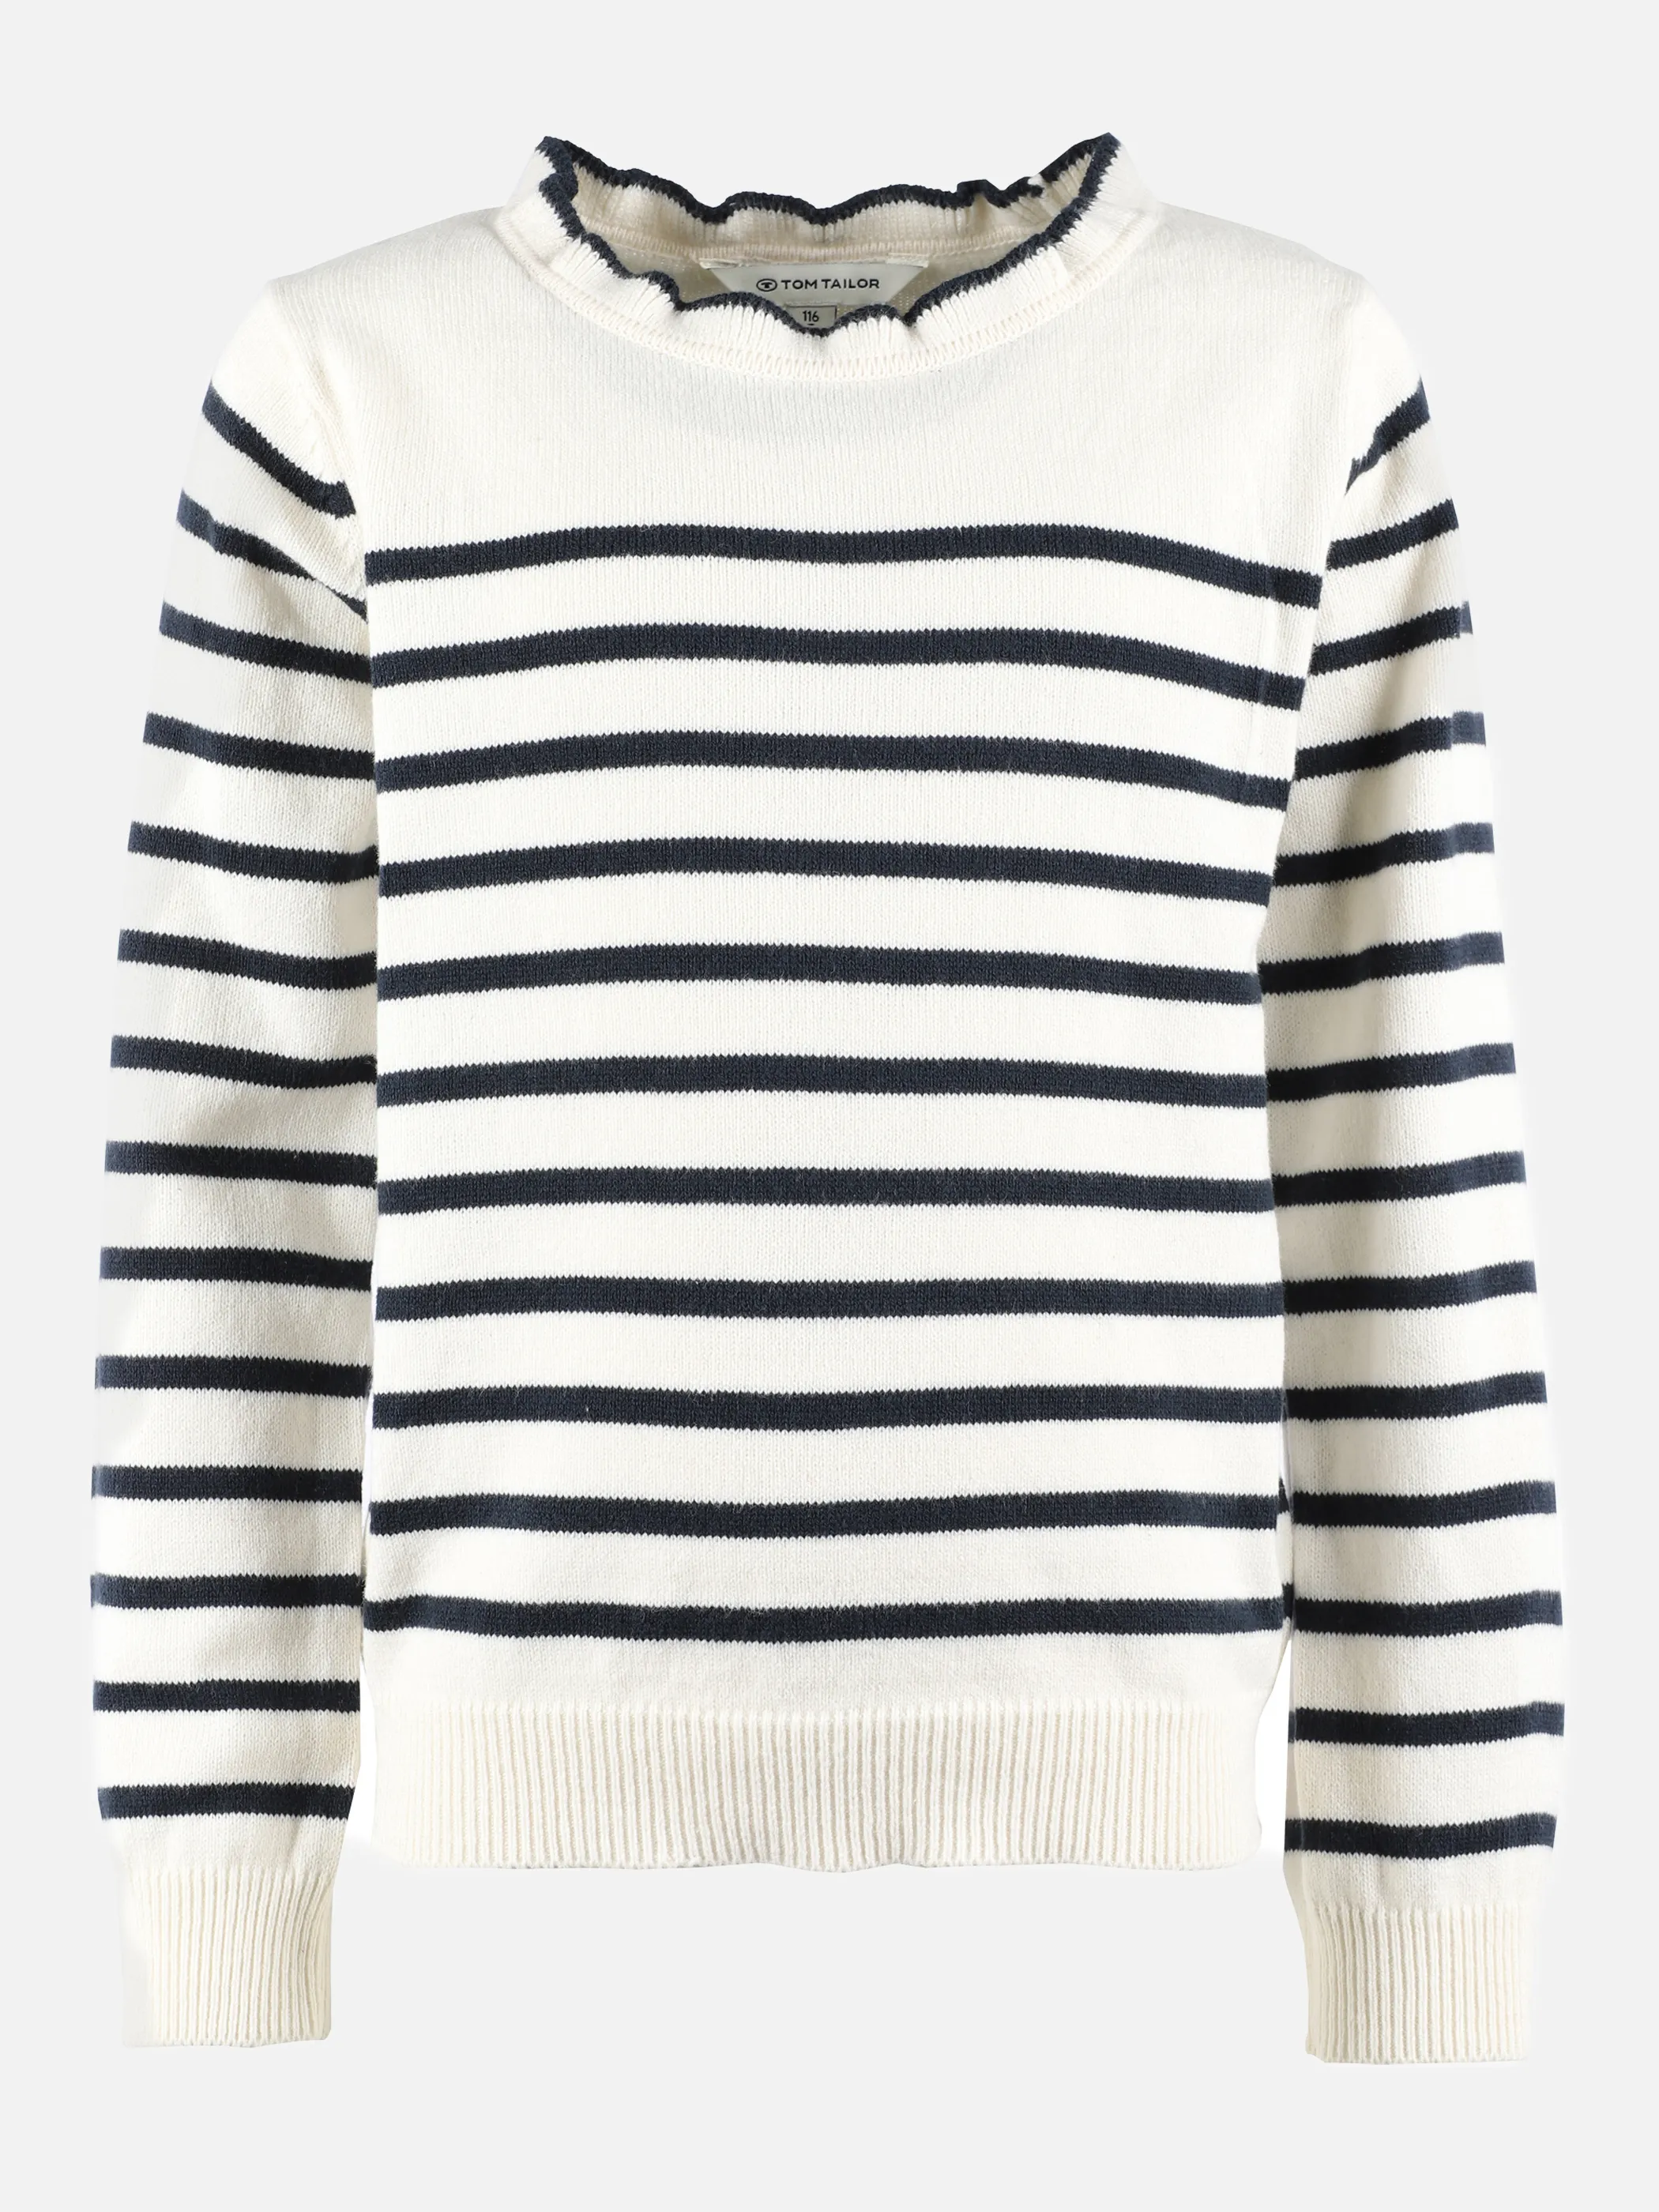 Tom Tailor 1033232 striped pullover Weiß 869682 30383 1